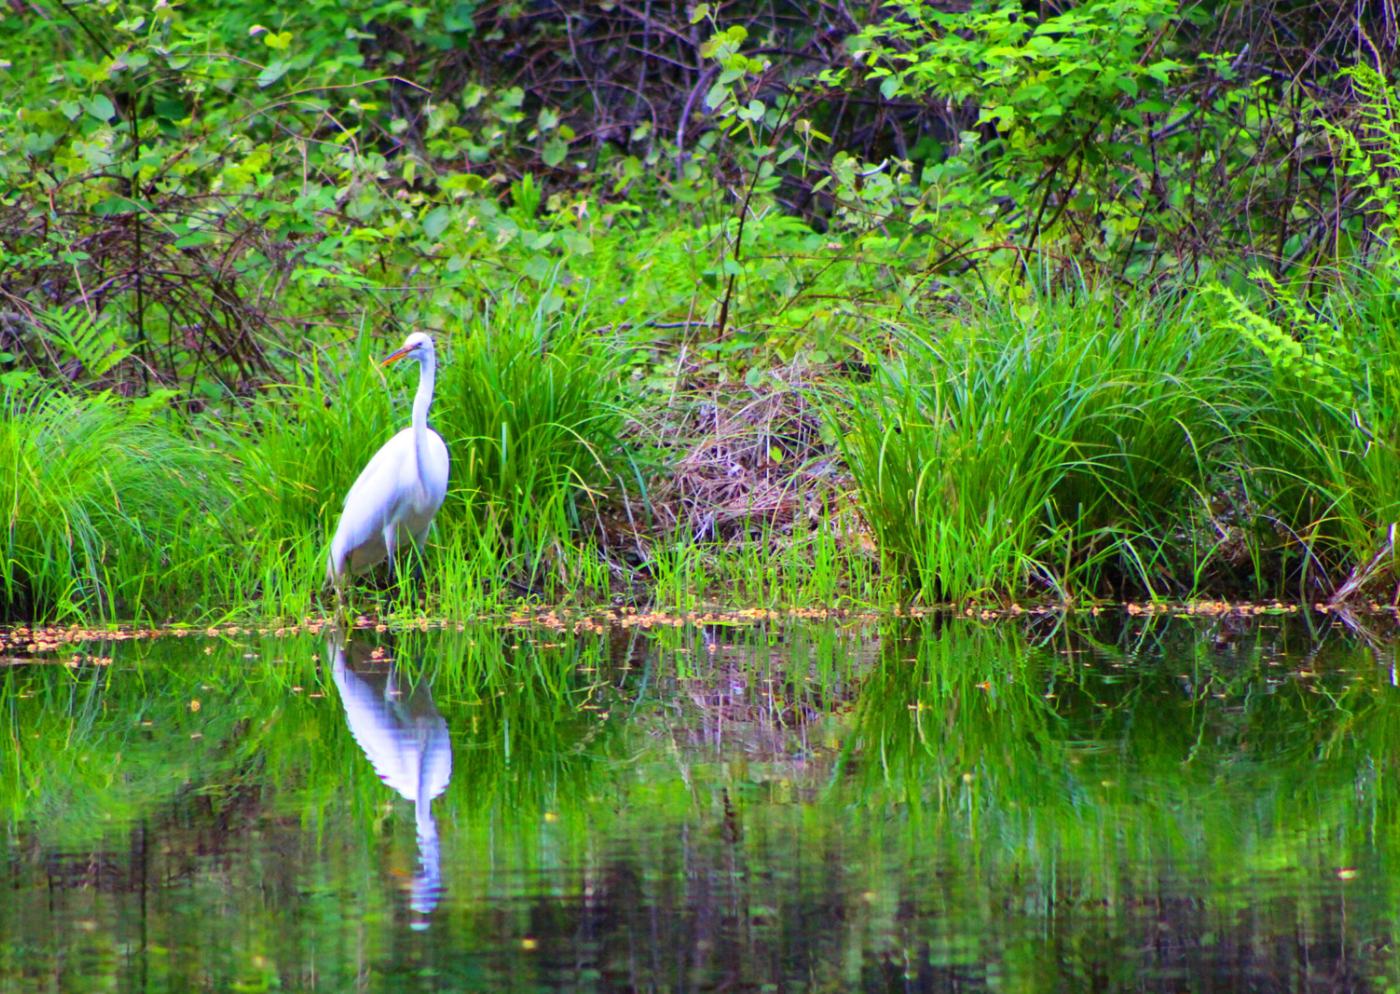 Heron with head turned to its right with its reflection in the clear water. Behind it is a preserve with tall grass.